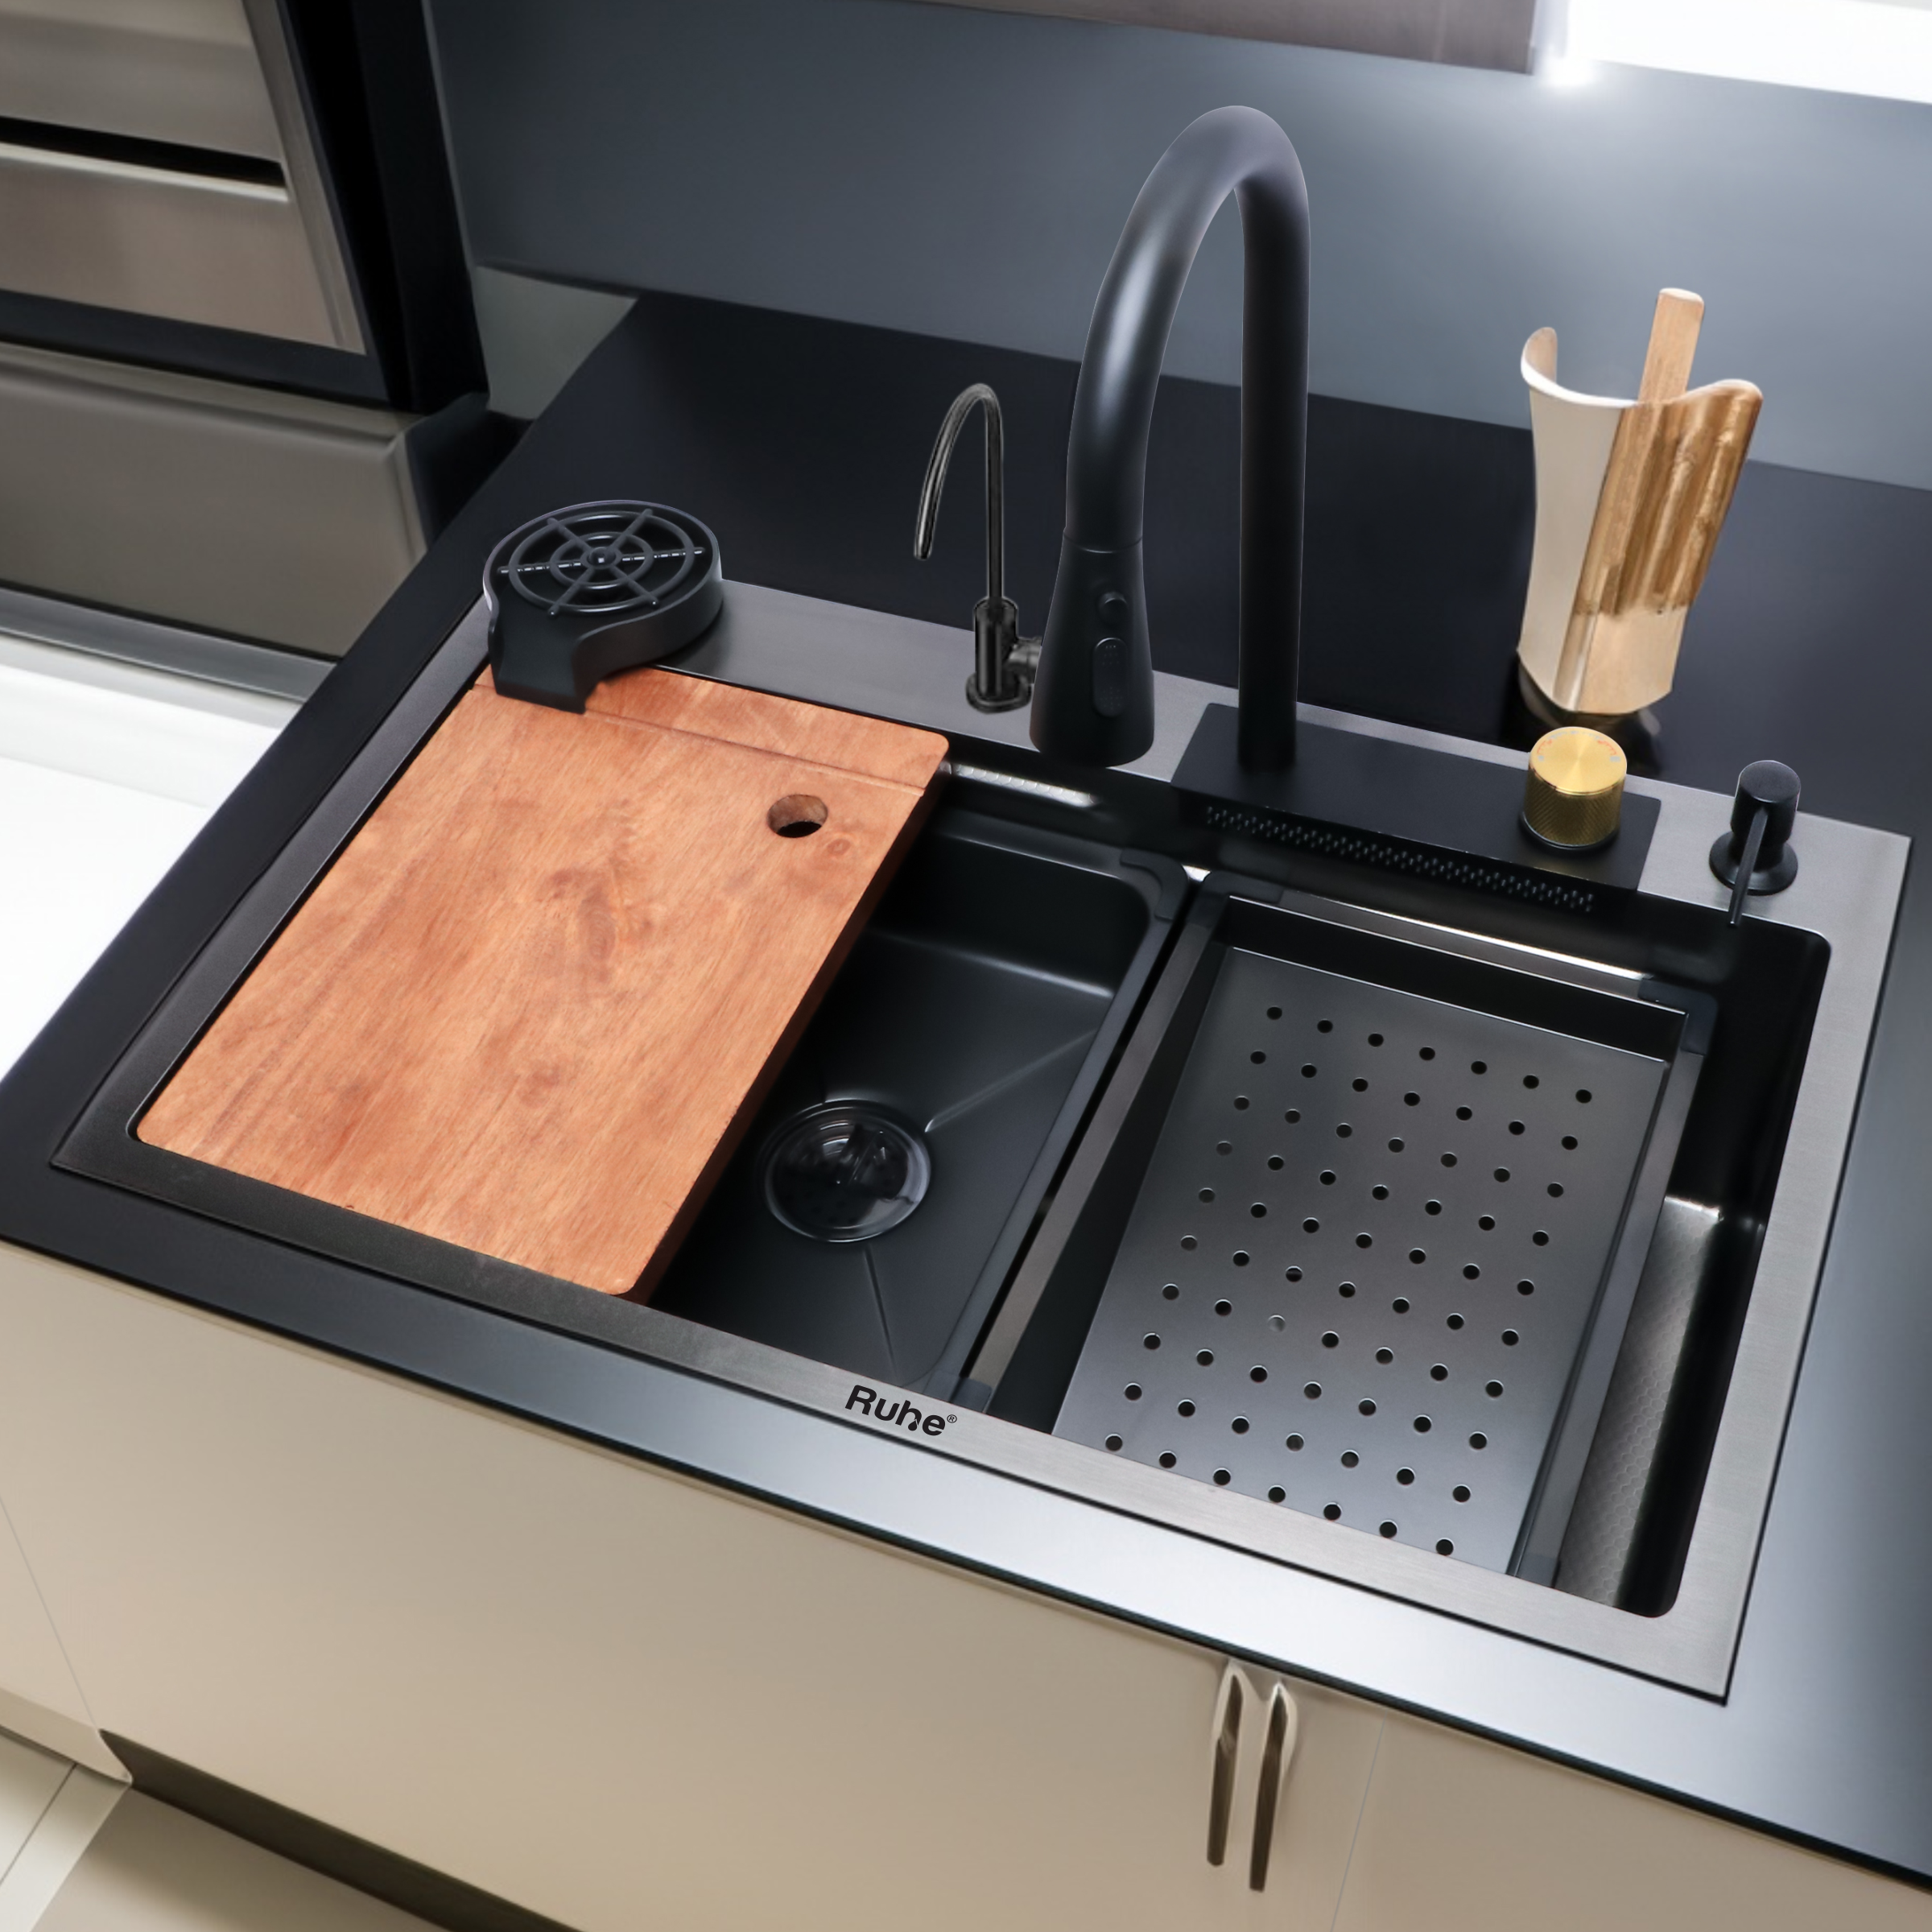  Handmade Premium Nano Kitchen Sink with Integrated Waterfall, Pull-Out & RO Faucet (30 x 18 x 9 Inches)